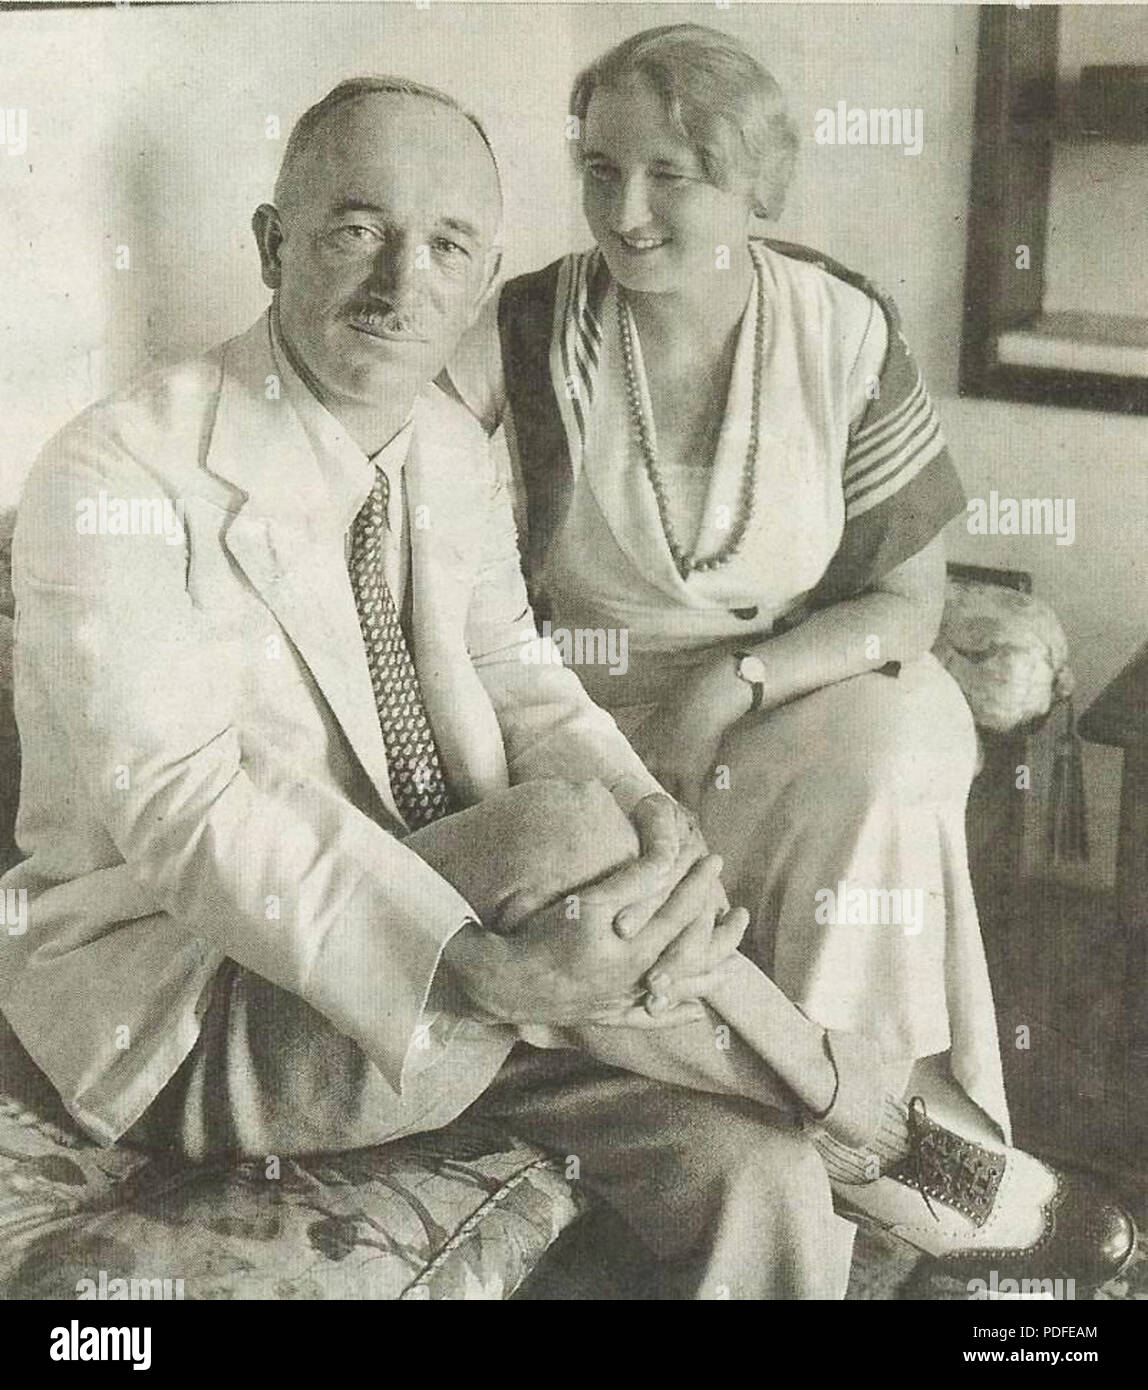 119-edvard-benes-with-his-wife-in-1934-PDFEAM.jpg